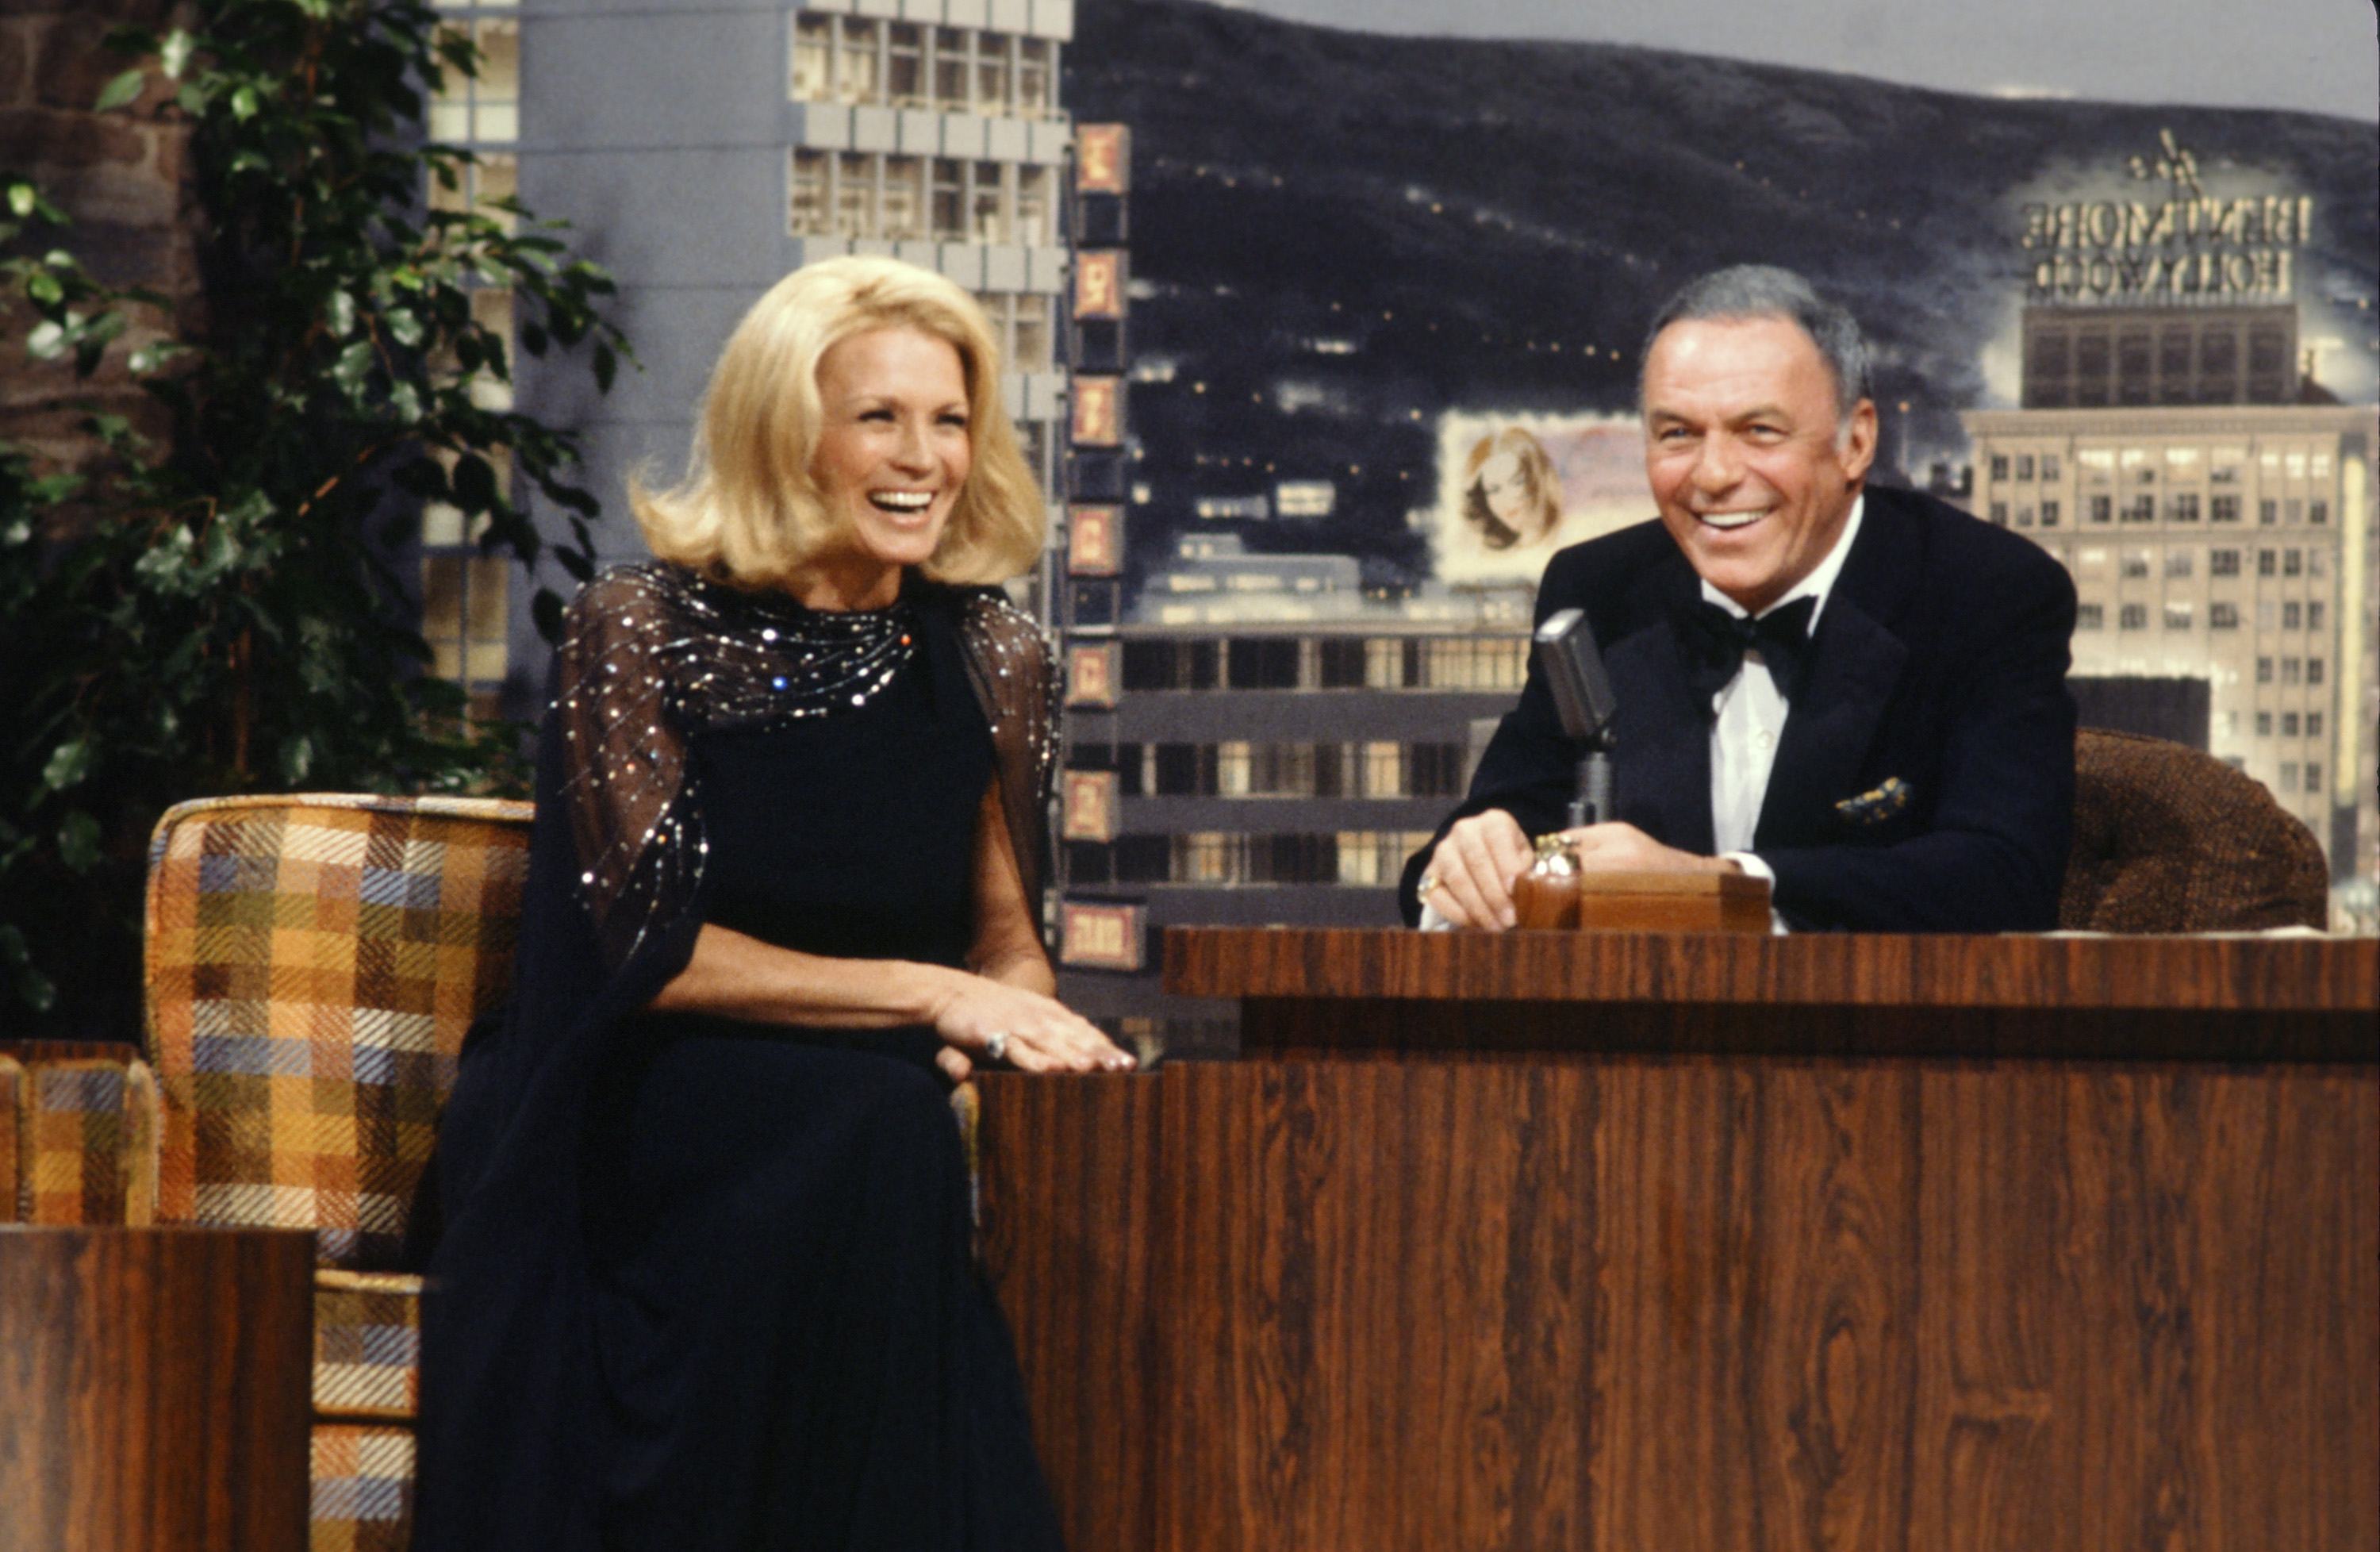 Angie Dickinson and Frank Sinatra as guest host on "The Tonight Show Starring Johnny Carson" on November 14, 1977 | Source: Getty Images